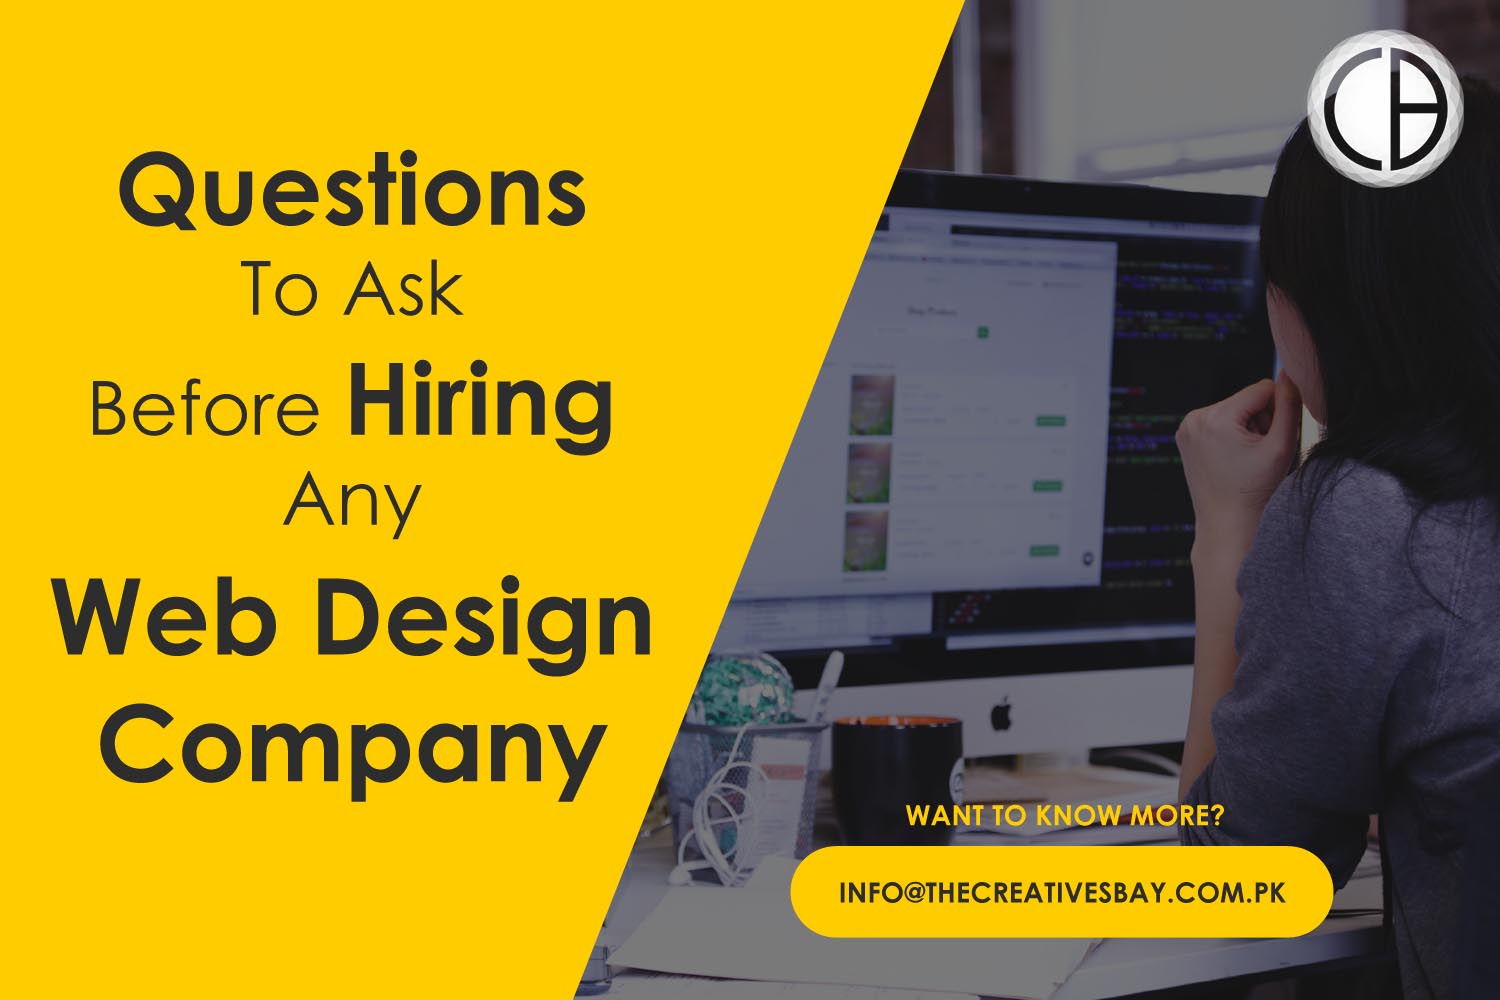 Questions to ask before hiring a web designer or web design company